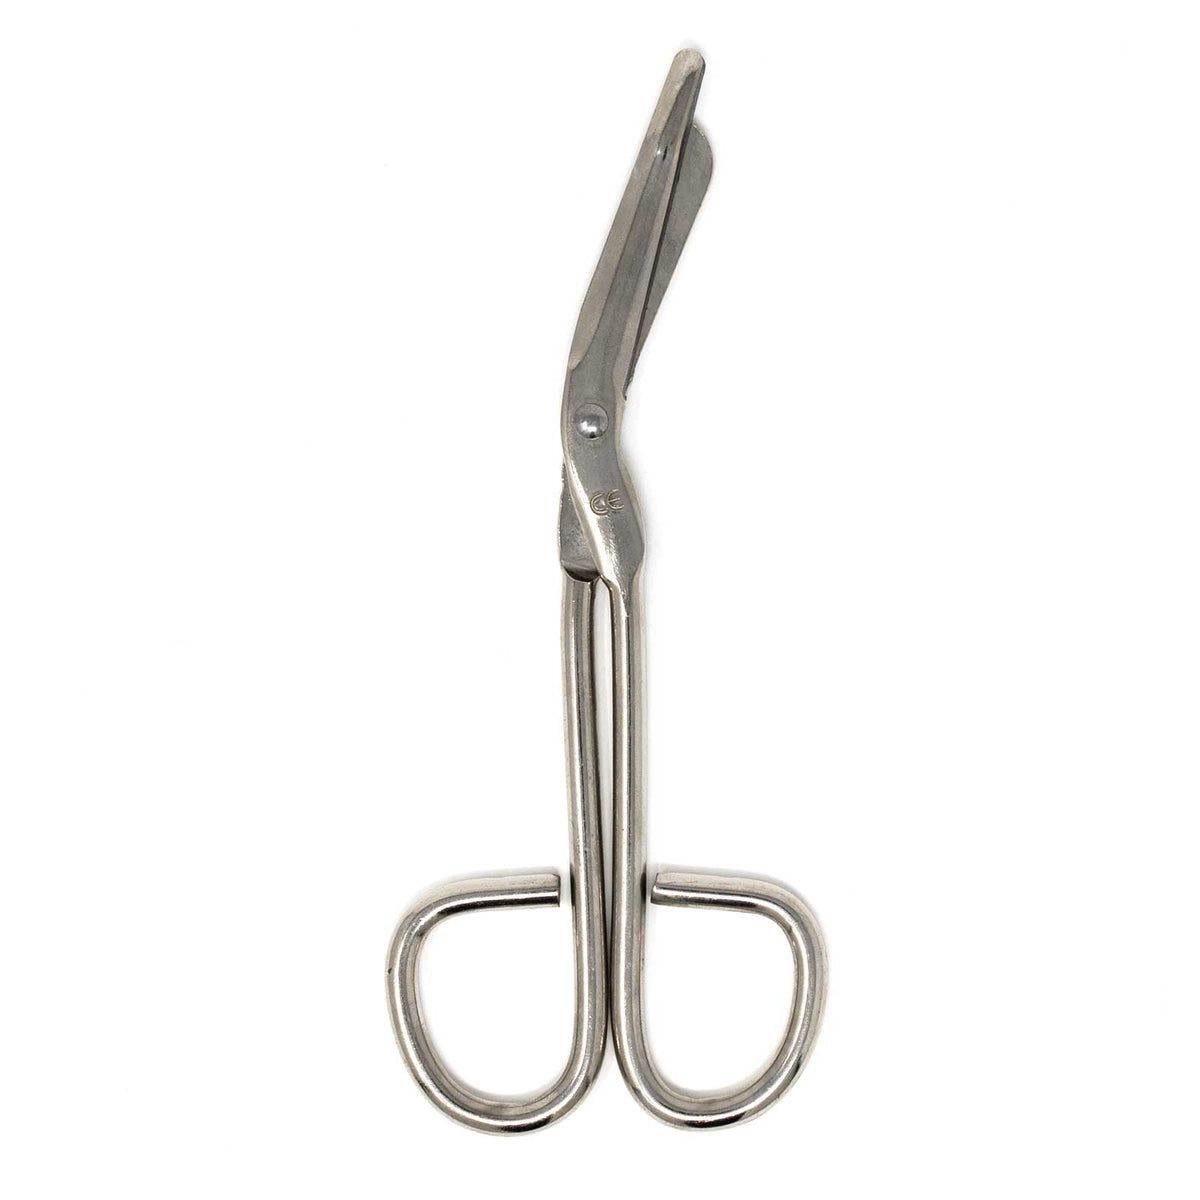 German Army Surgical Bandage Scissors